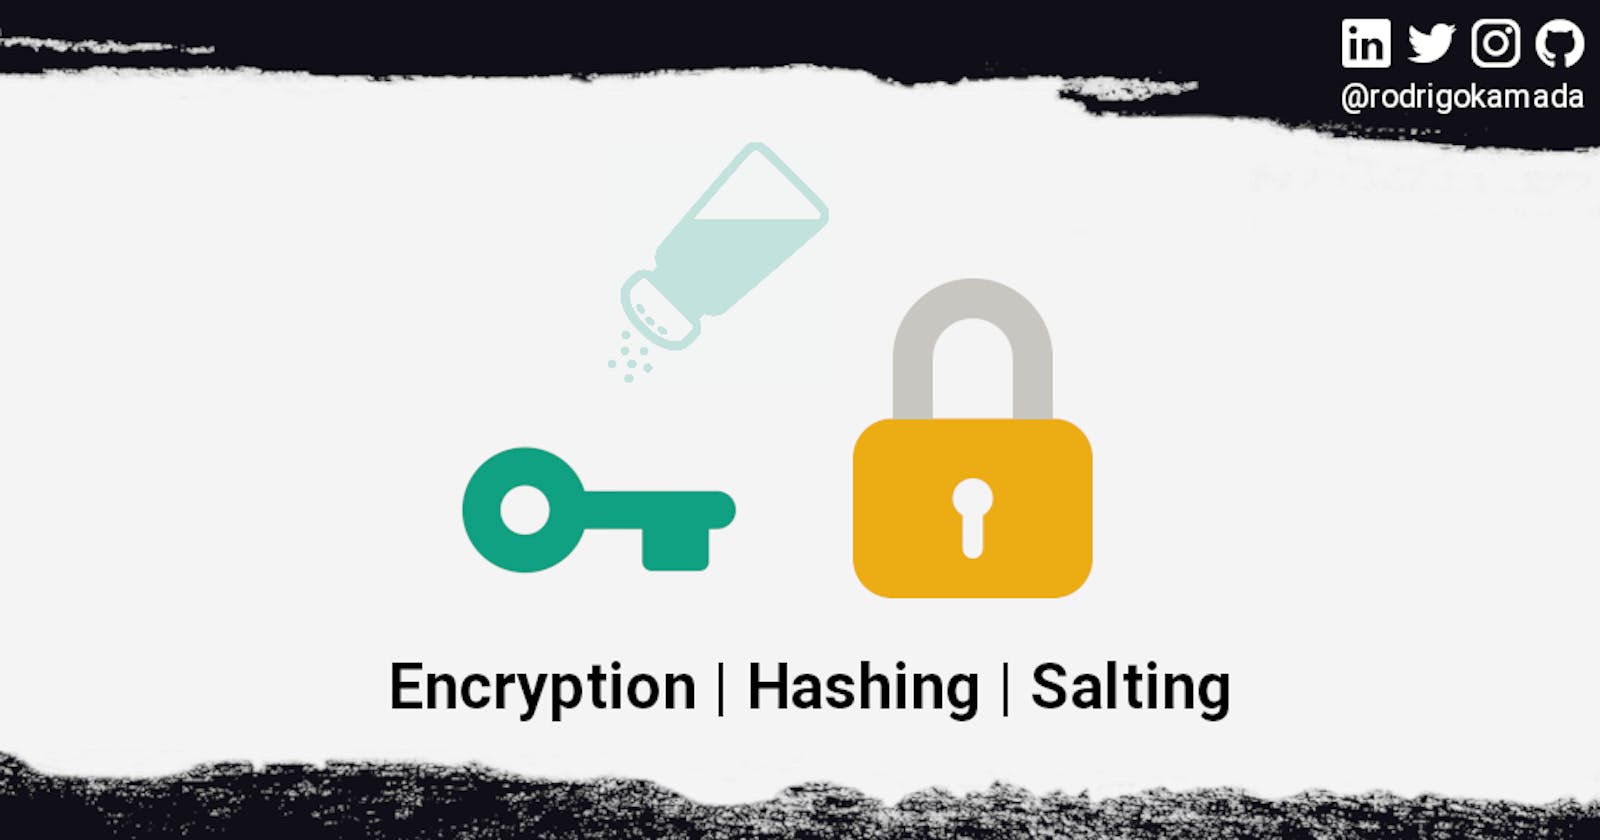 What is the difference between encryption, hashing and salting?